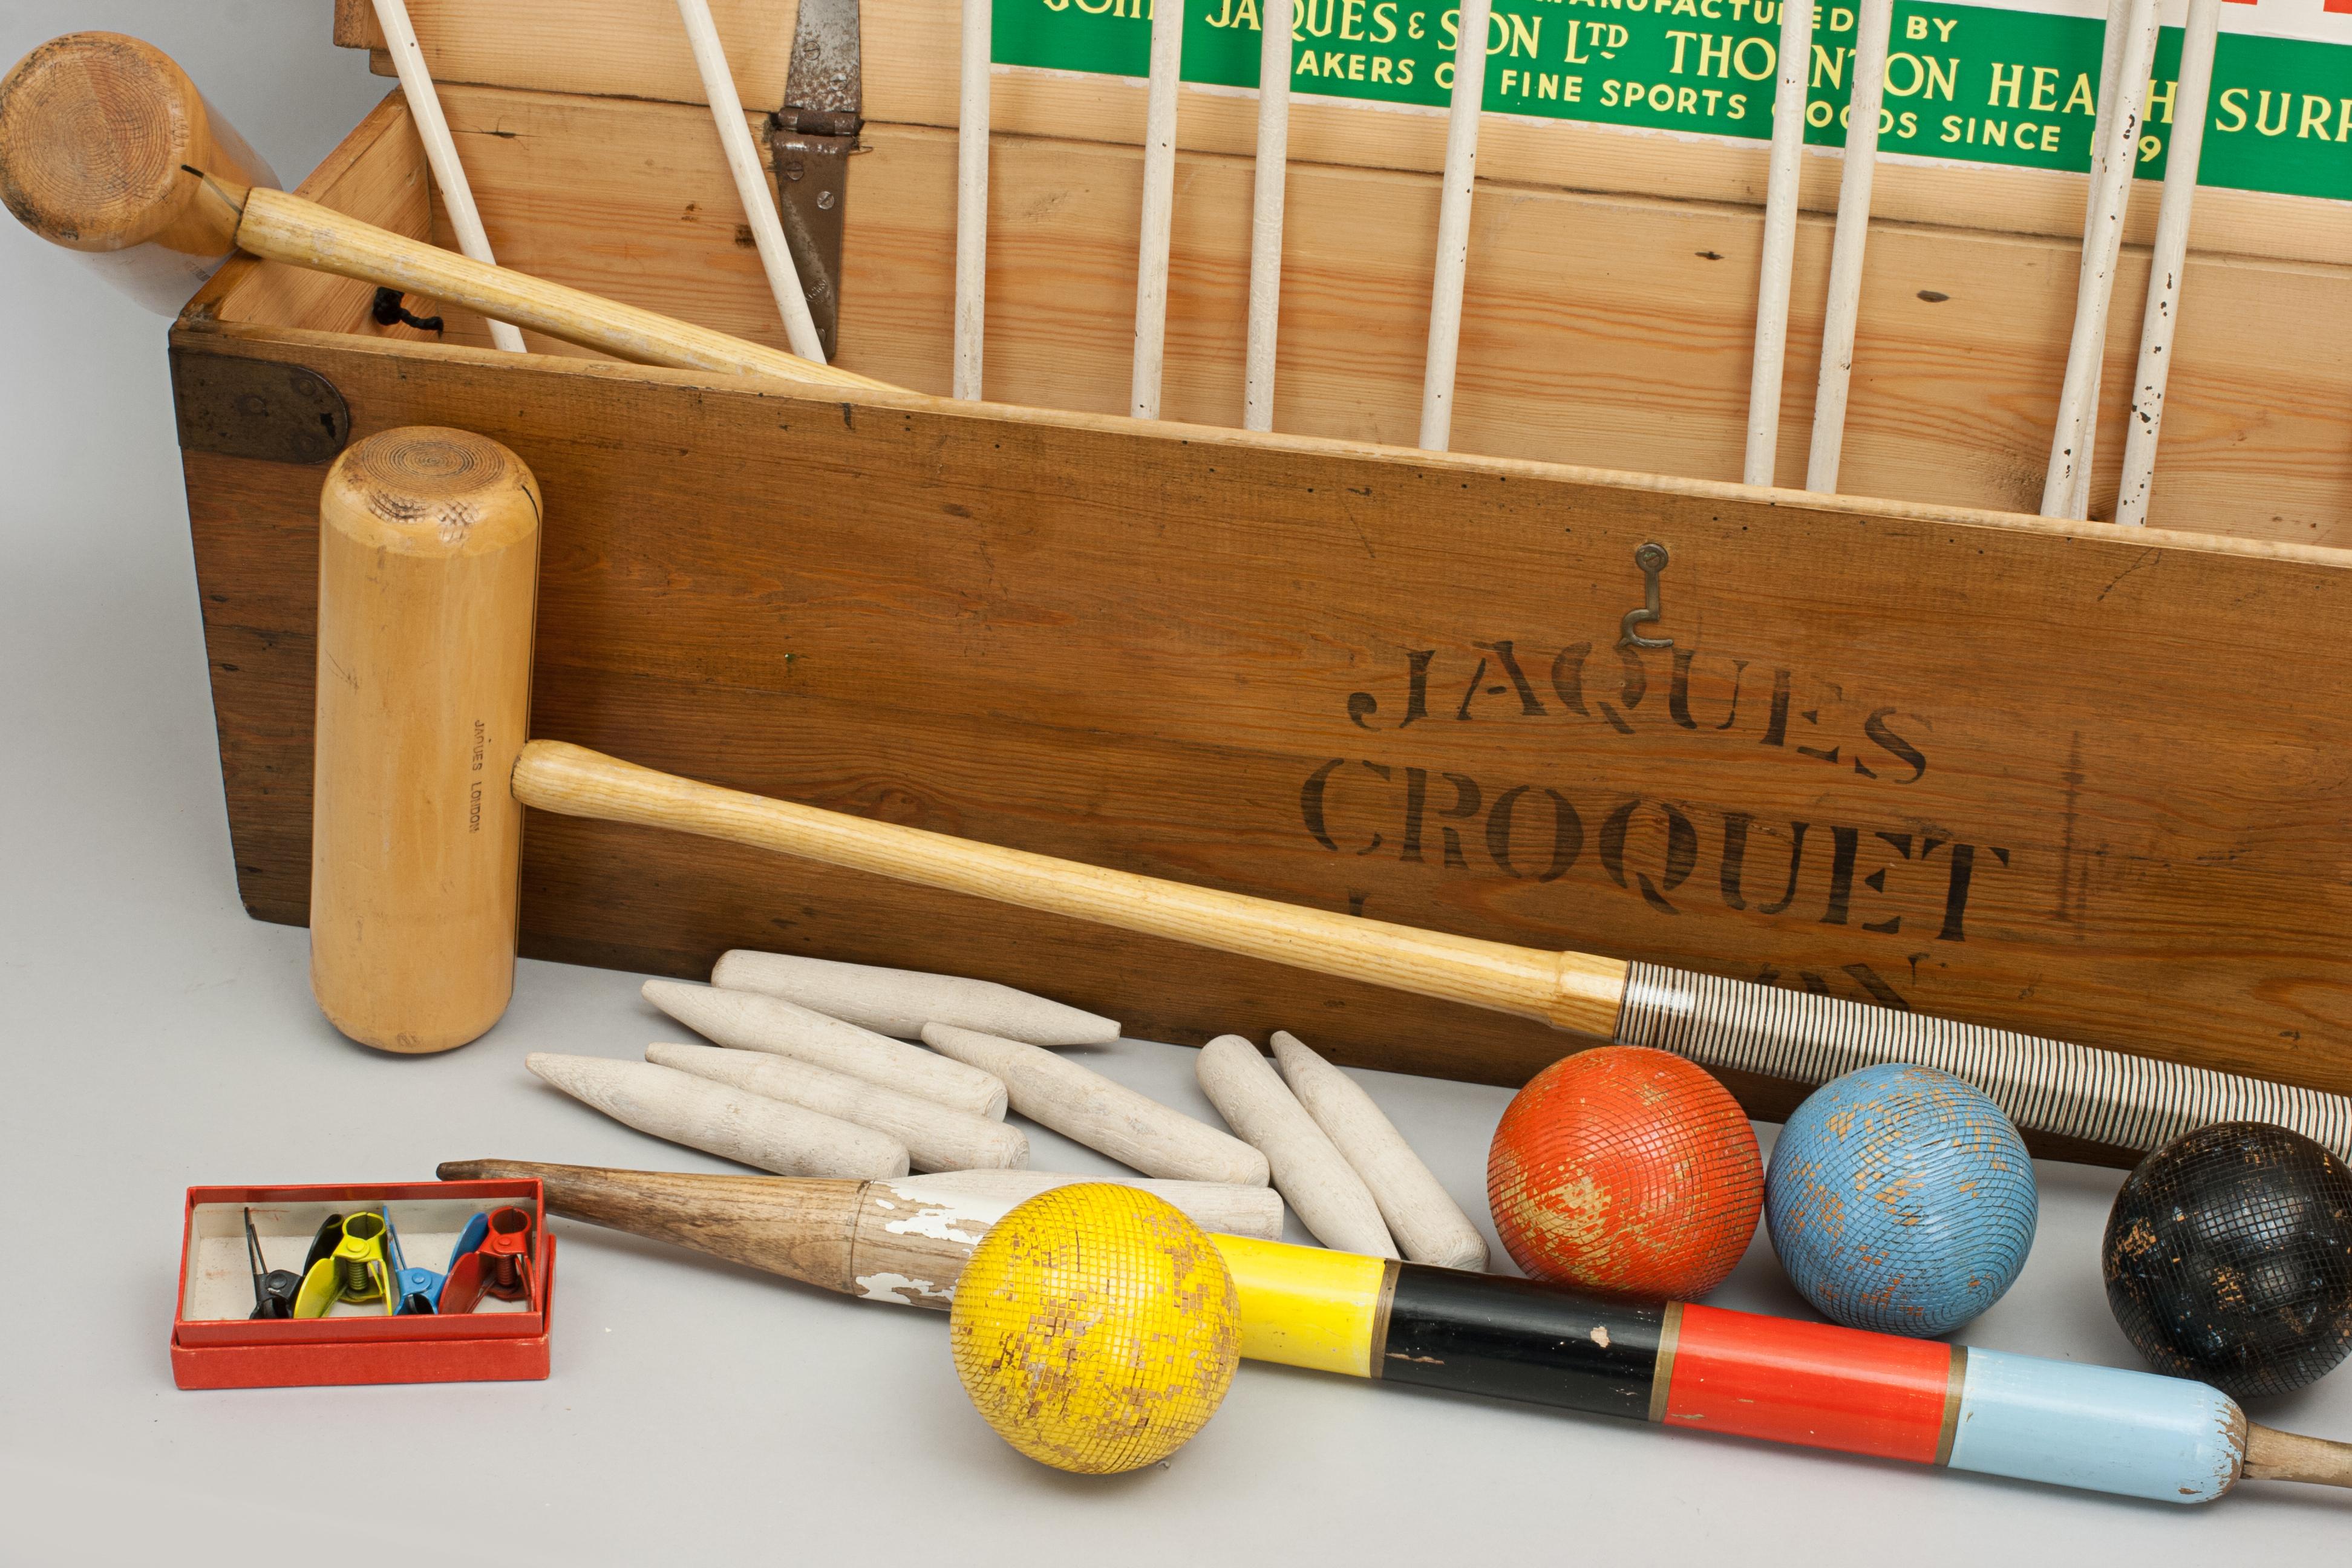 Vintage John Jaques Croquet set.
A good quality Jaques croquet set in original pine box with Jaques' name painted onto the front and lid. It is with four box wood mallets with guide lines on the tops of the heads and octagonal handles with cord